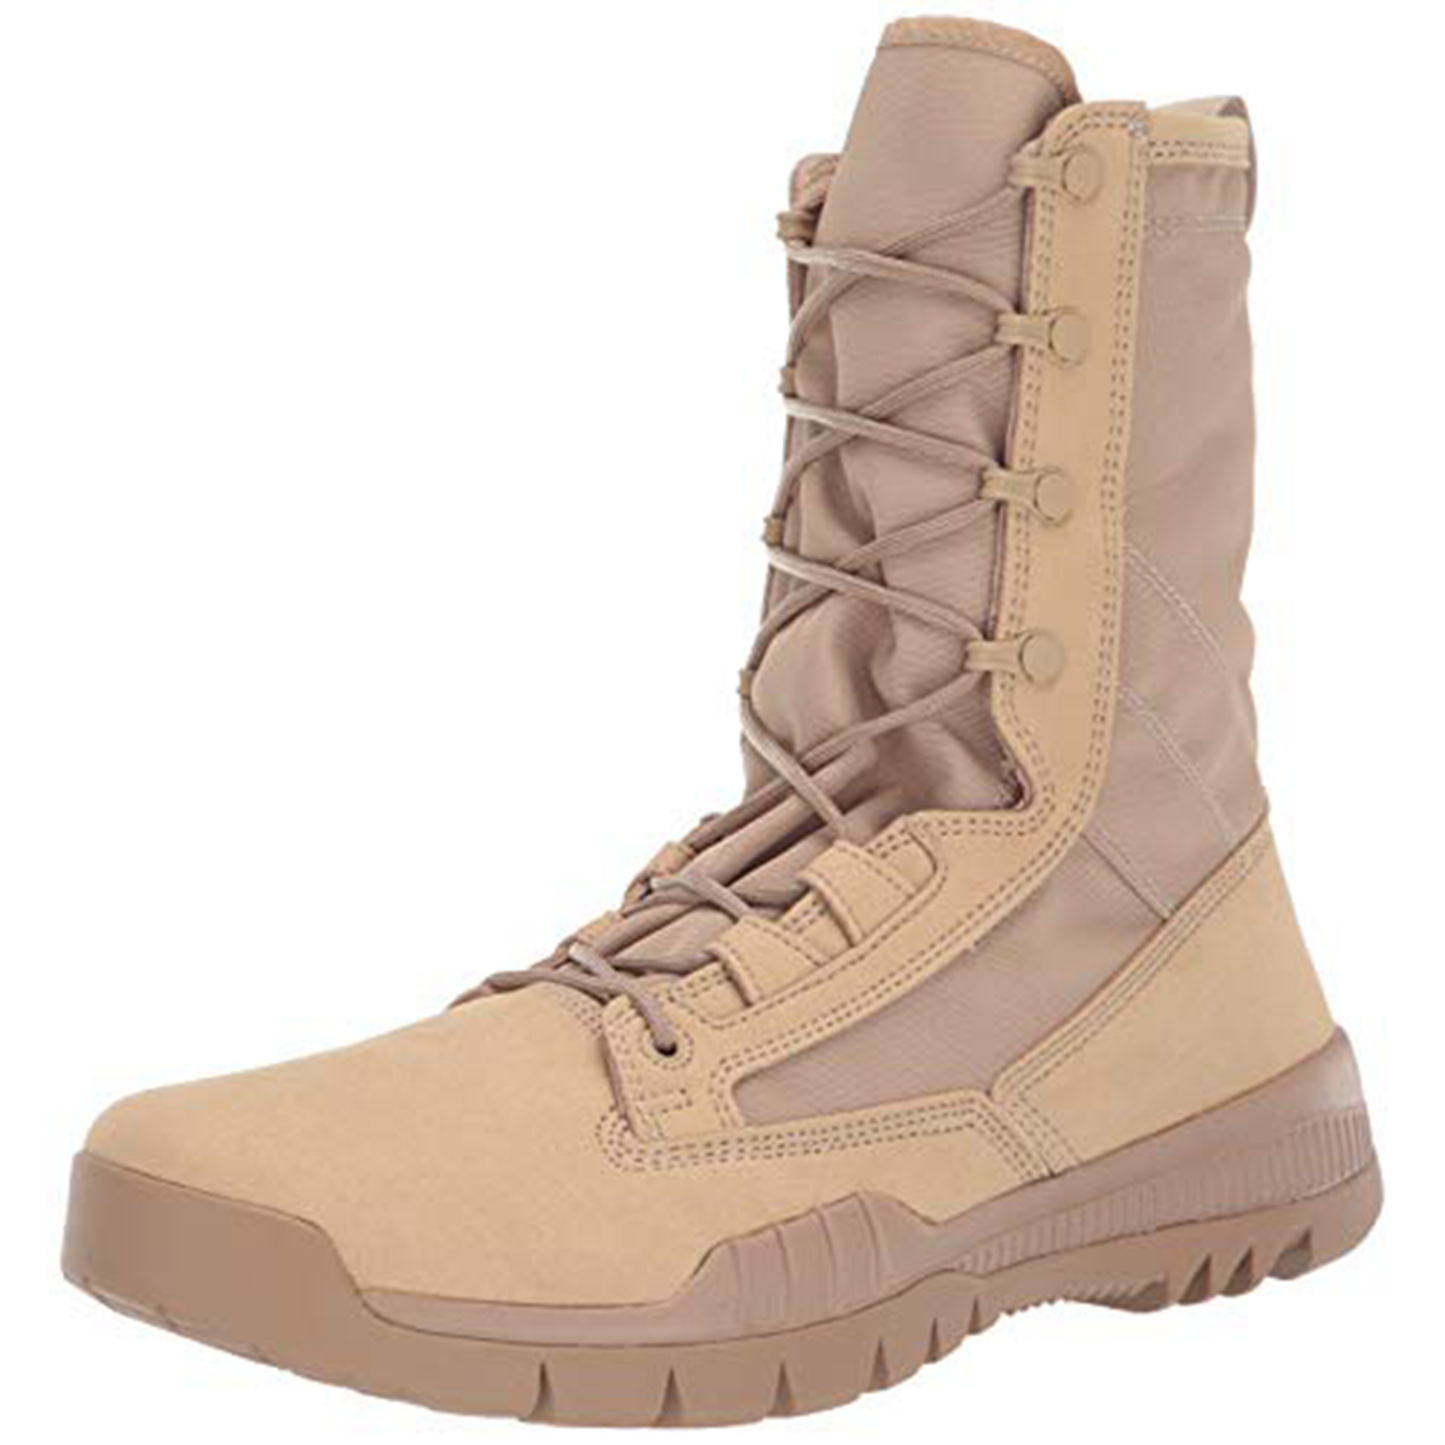 Nike SFB Field 8" Leather Special Tactics Men's Boots (13 D US)